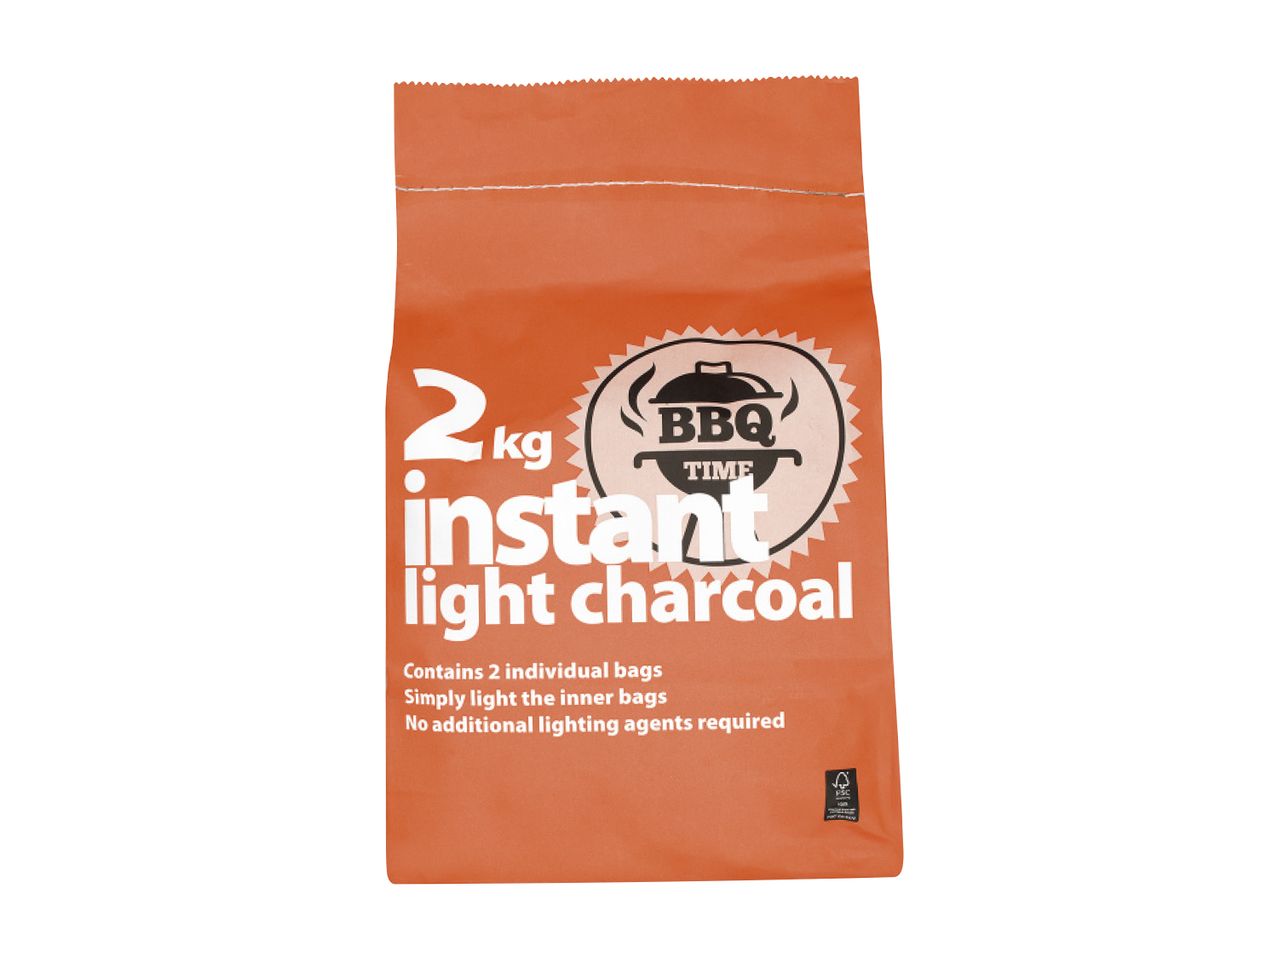 Go to full screen view: Big K Instant Light Charcoal - Image 1